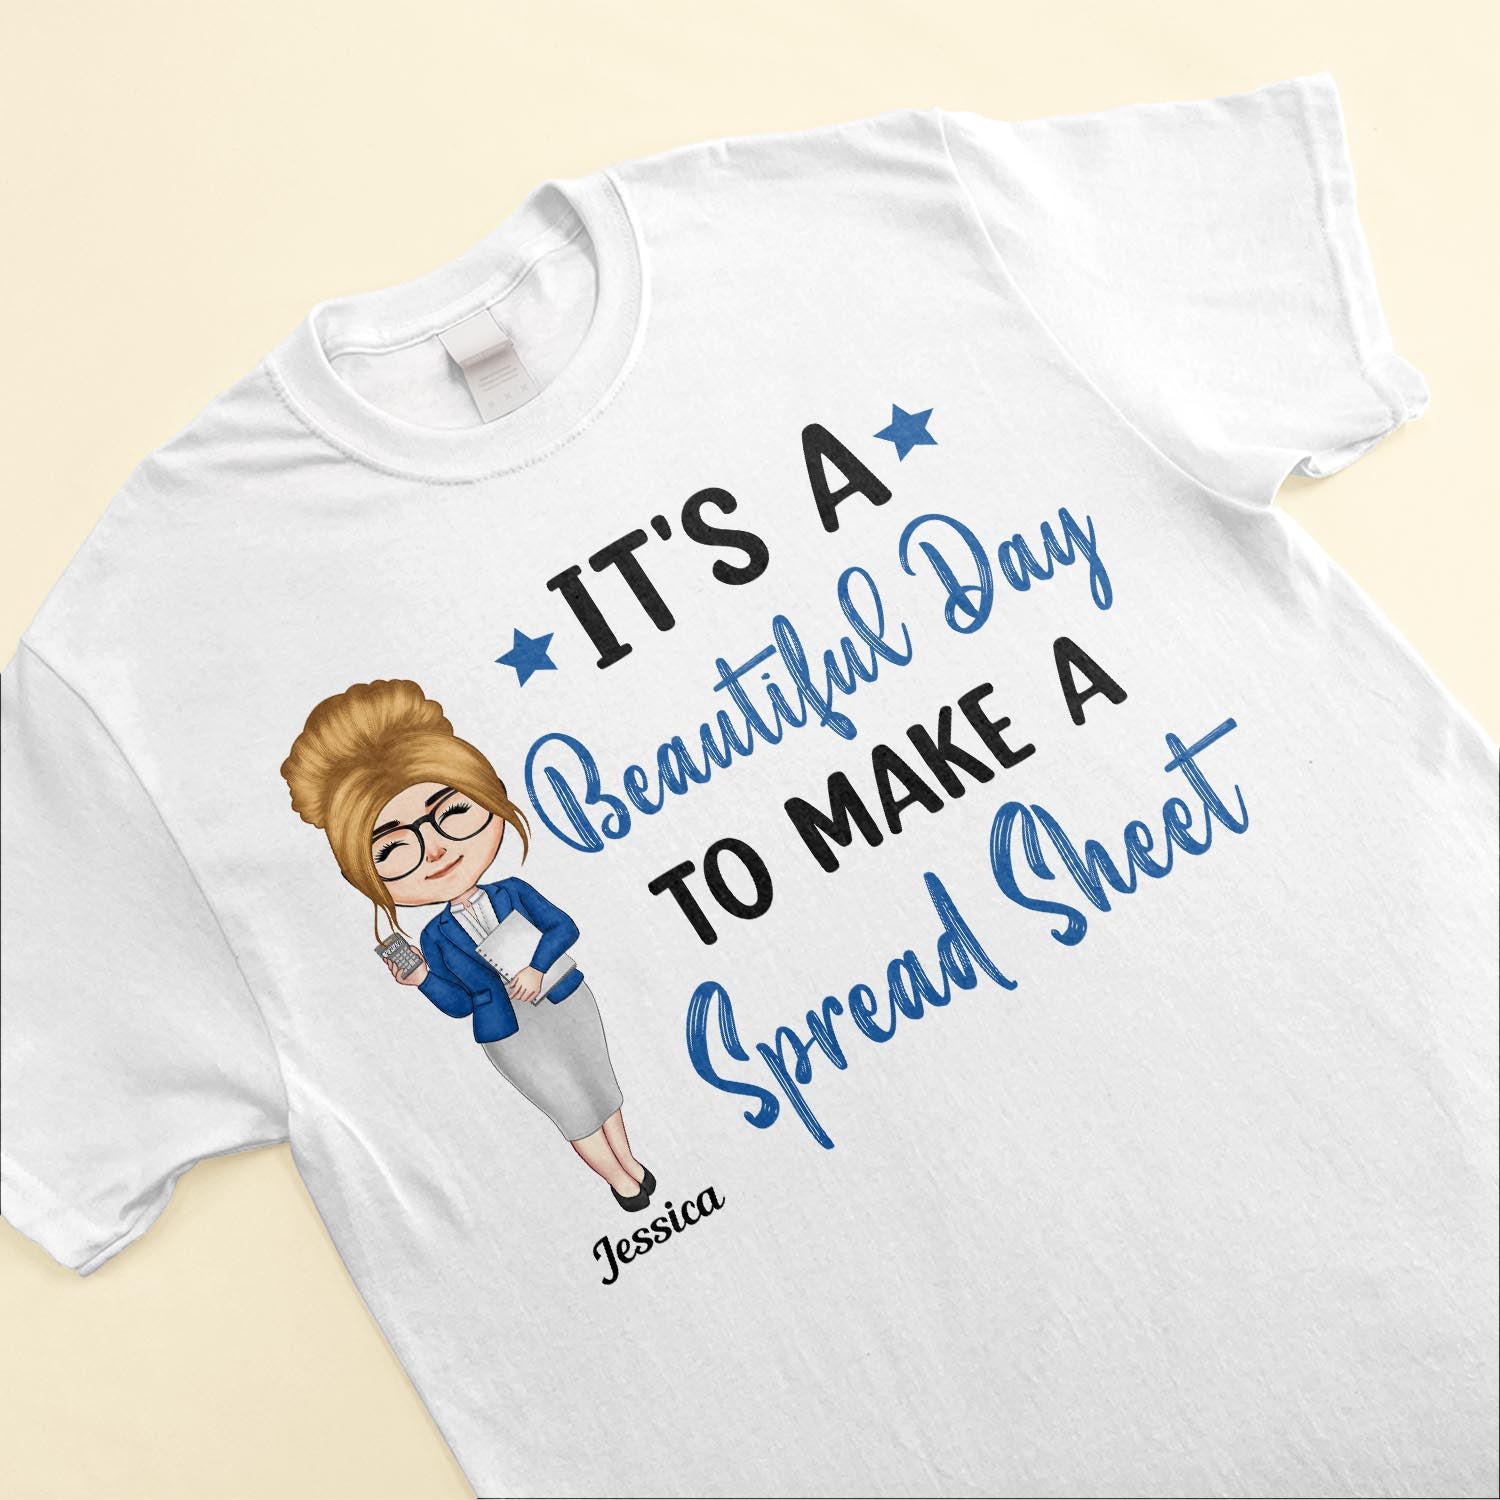 It's A Beautiful Day To Make A Spread Sheet - Personalized Shirt - Birthday, Funny Gift For Accountant